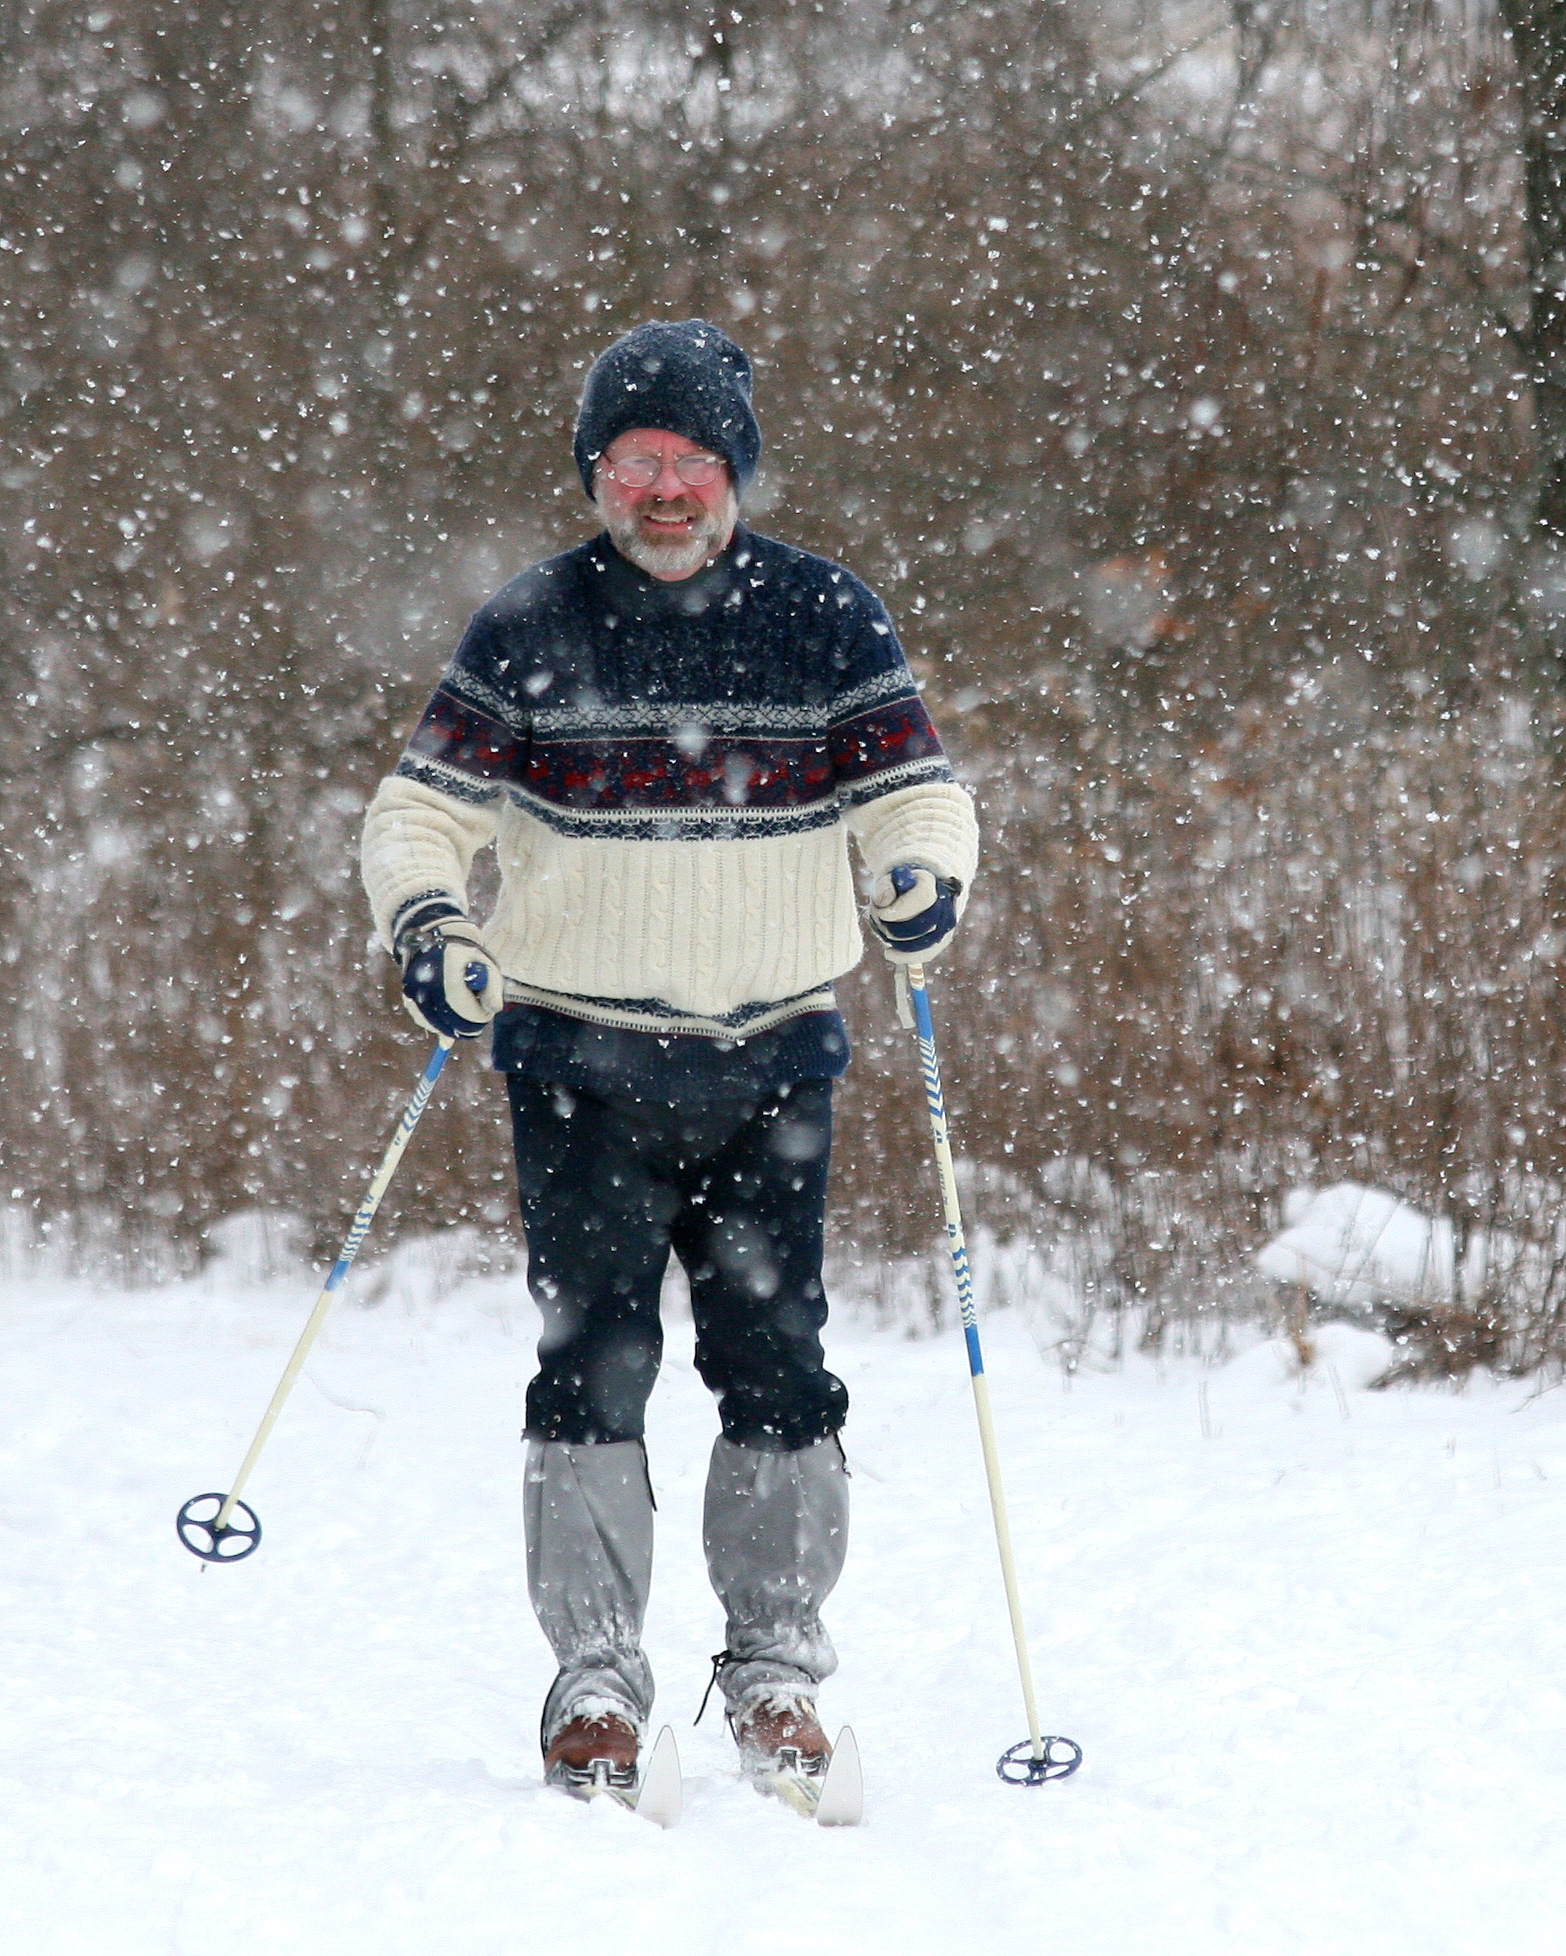 Cross-country skier on the Coyote Run Trail at Highbanks.